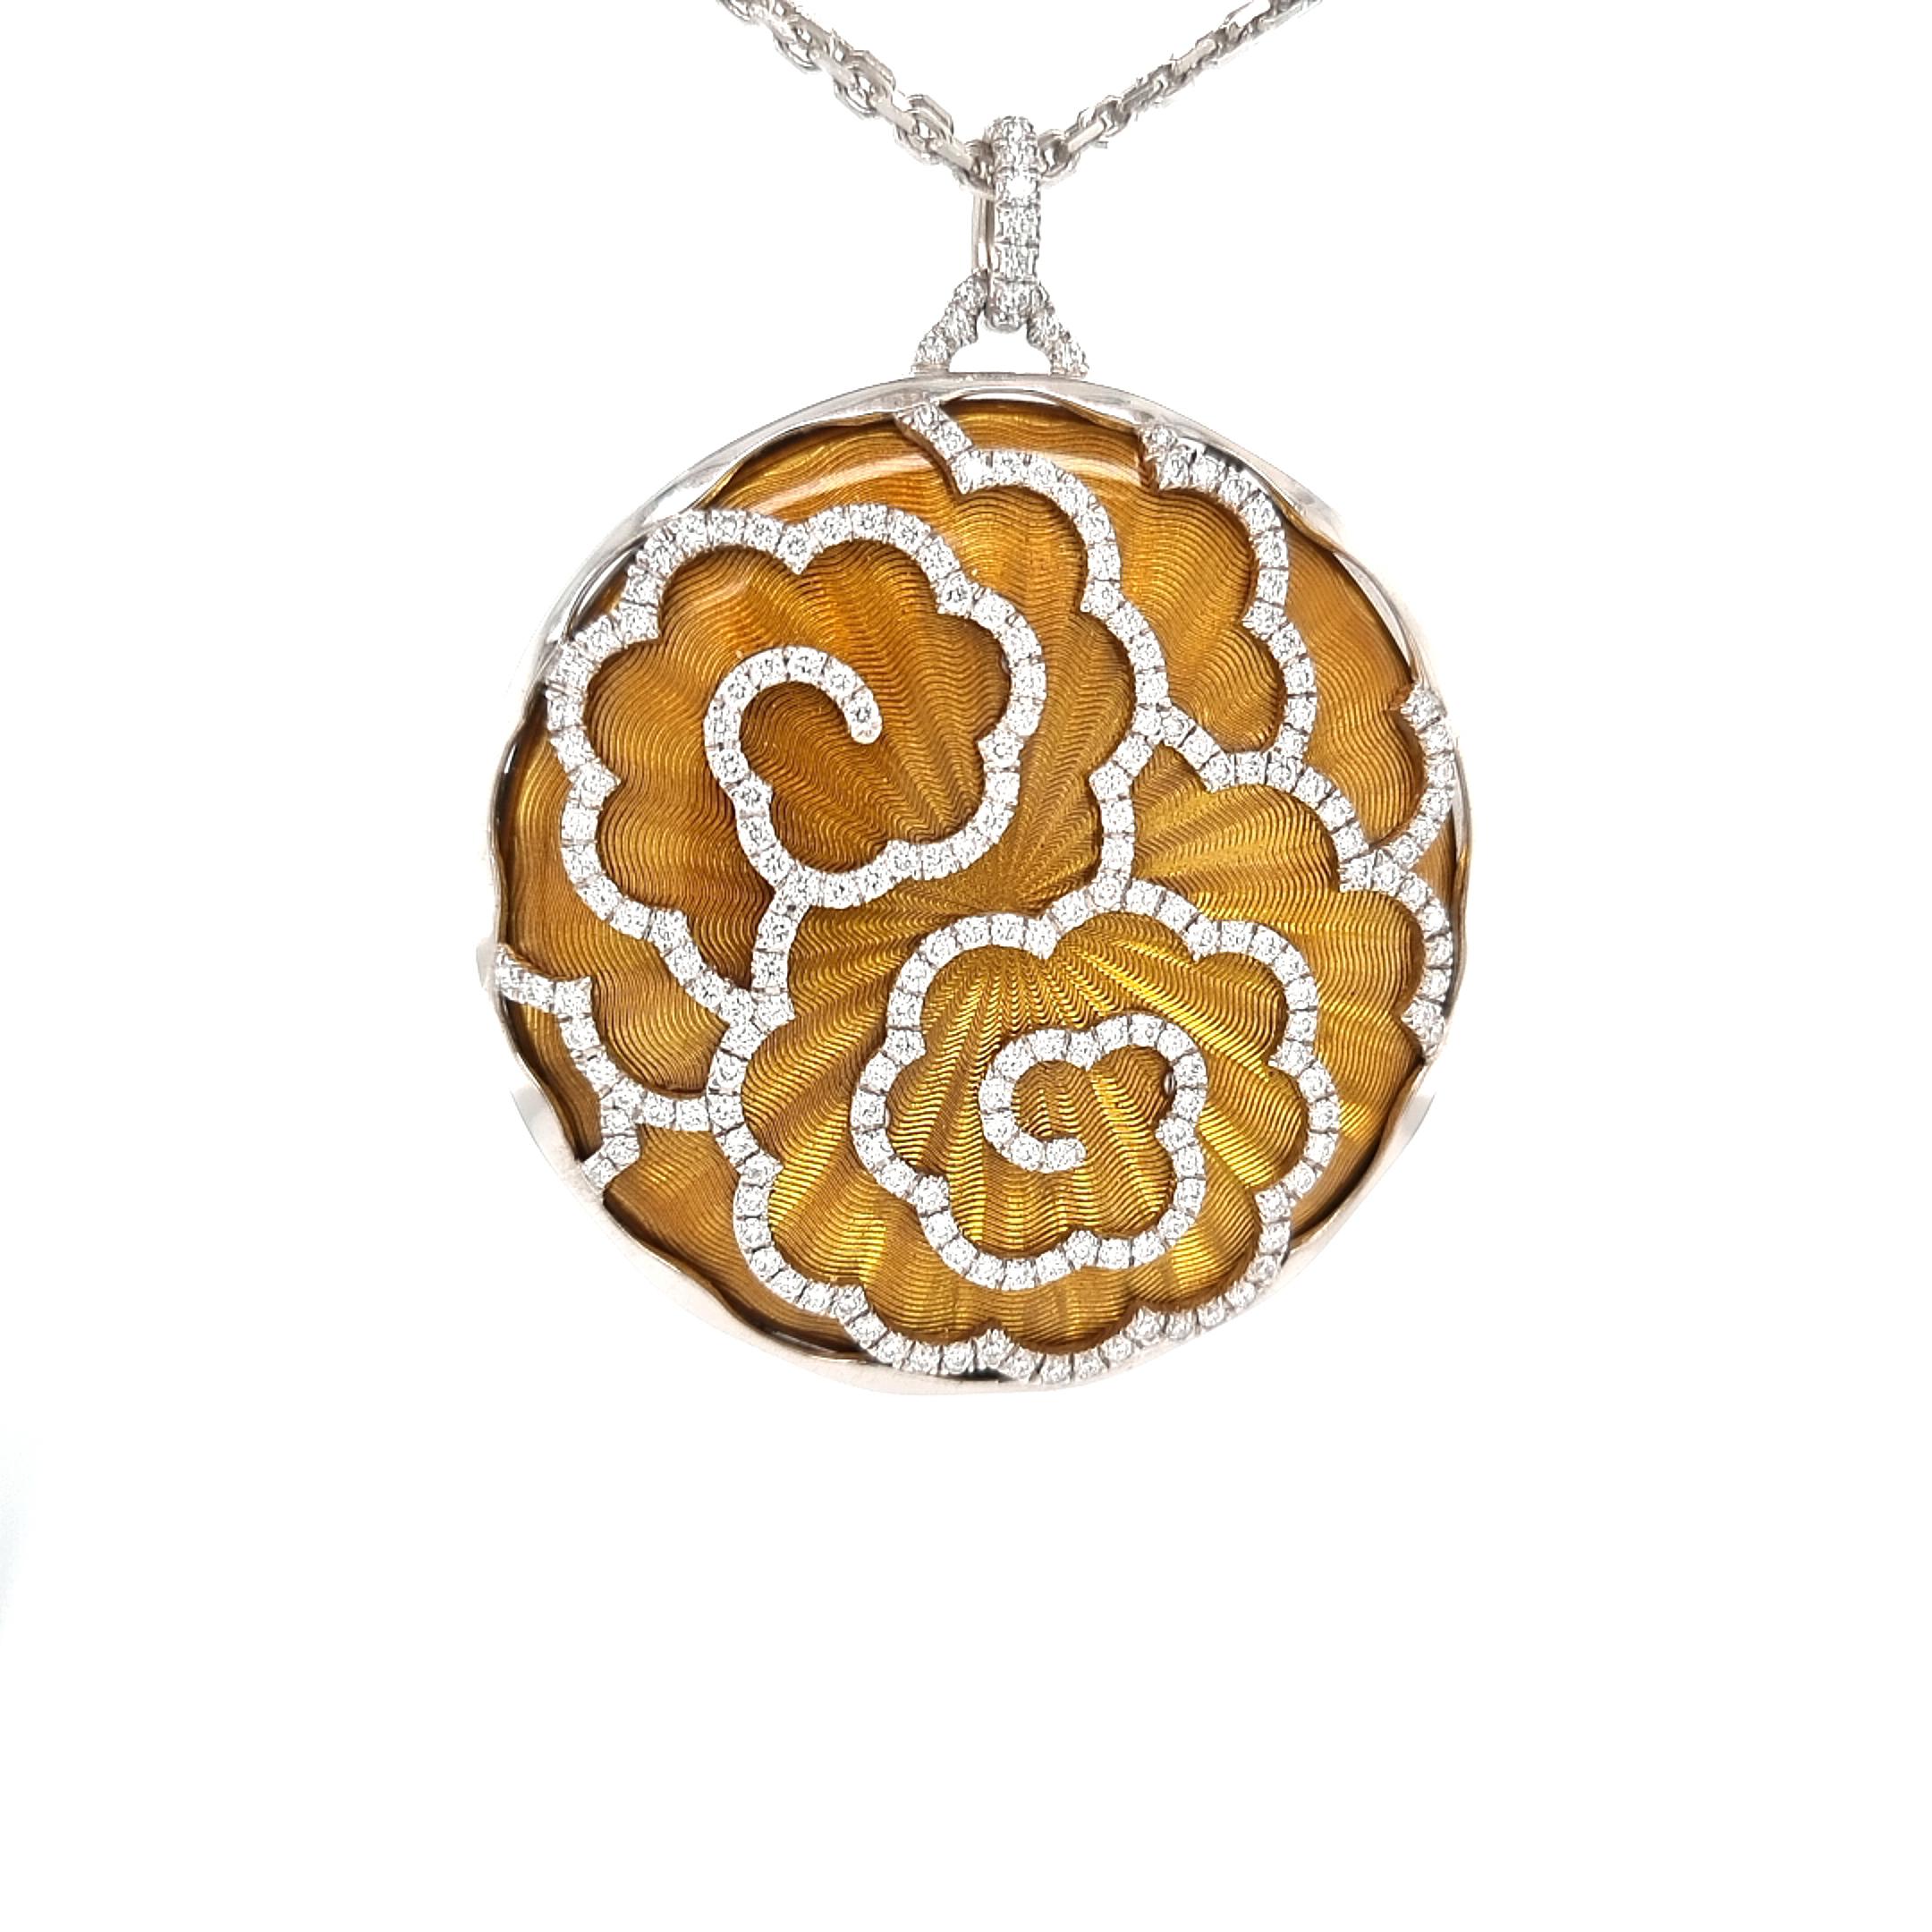 Victor Mayer round Pendant Necklace, 18k white and yellow gold (disc underneath enamel), Artemins collection, amber yellow vitreous enamel, guilloche engraving underneath, 213 diamonds, total 2.12 ct, G VS brilliant cut, diameter app. 46.0 mm

About